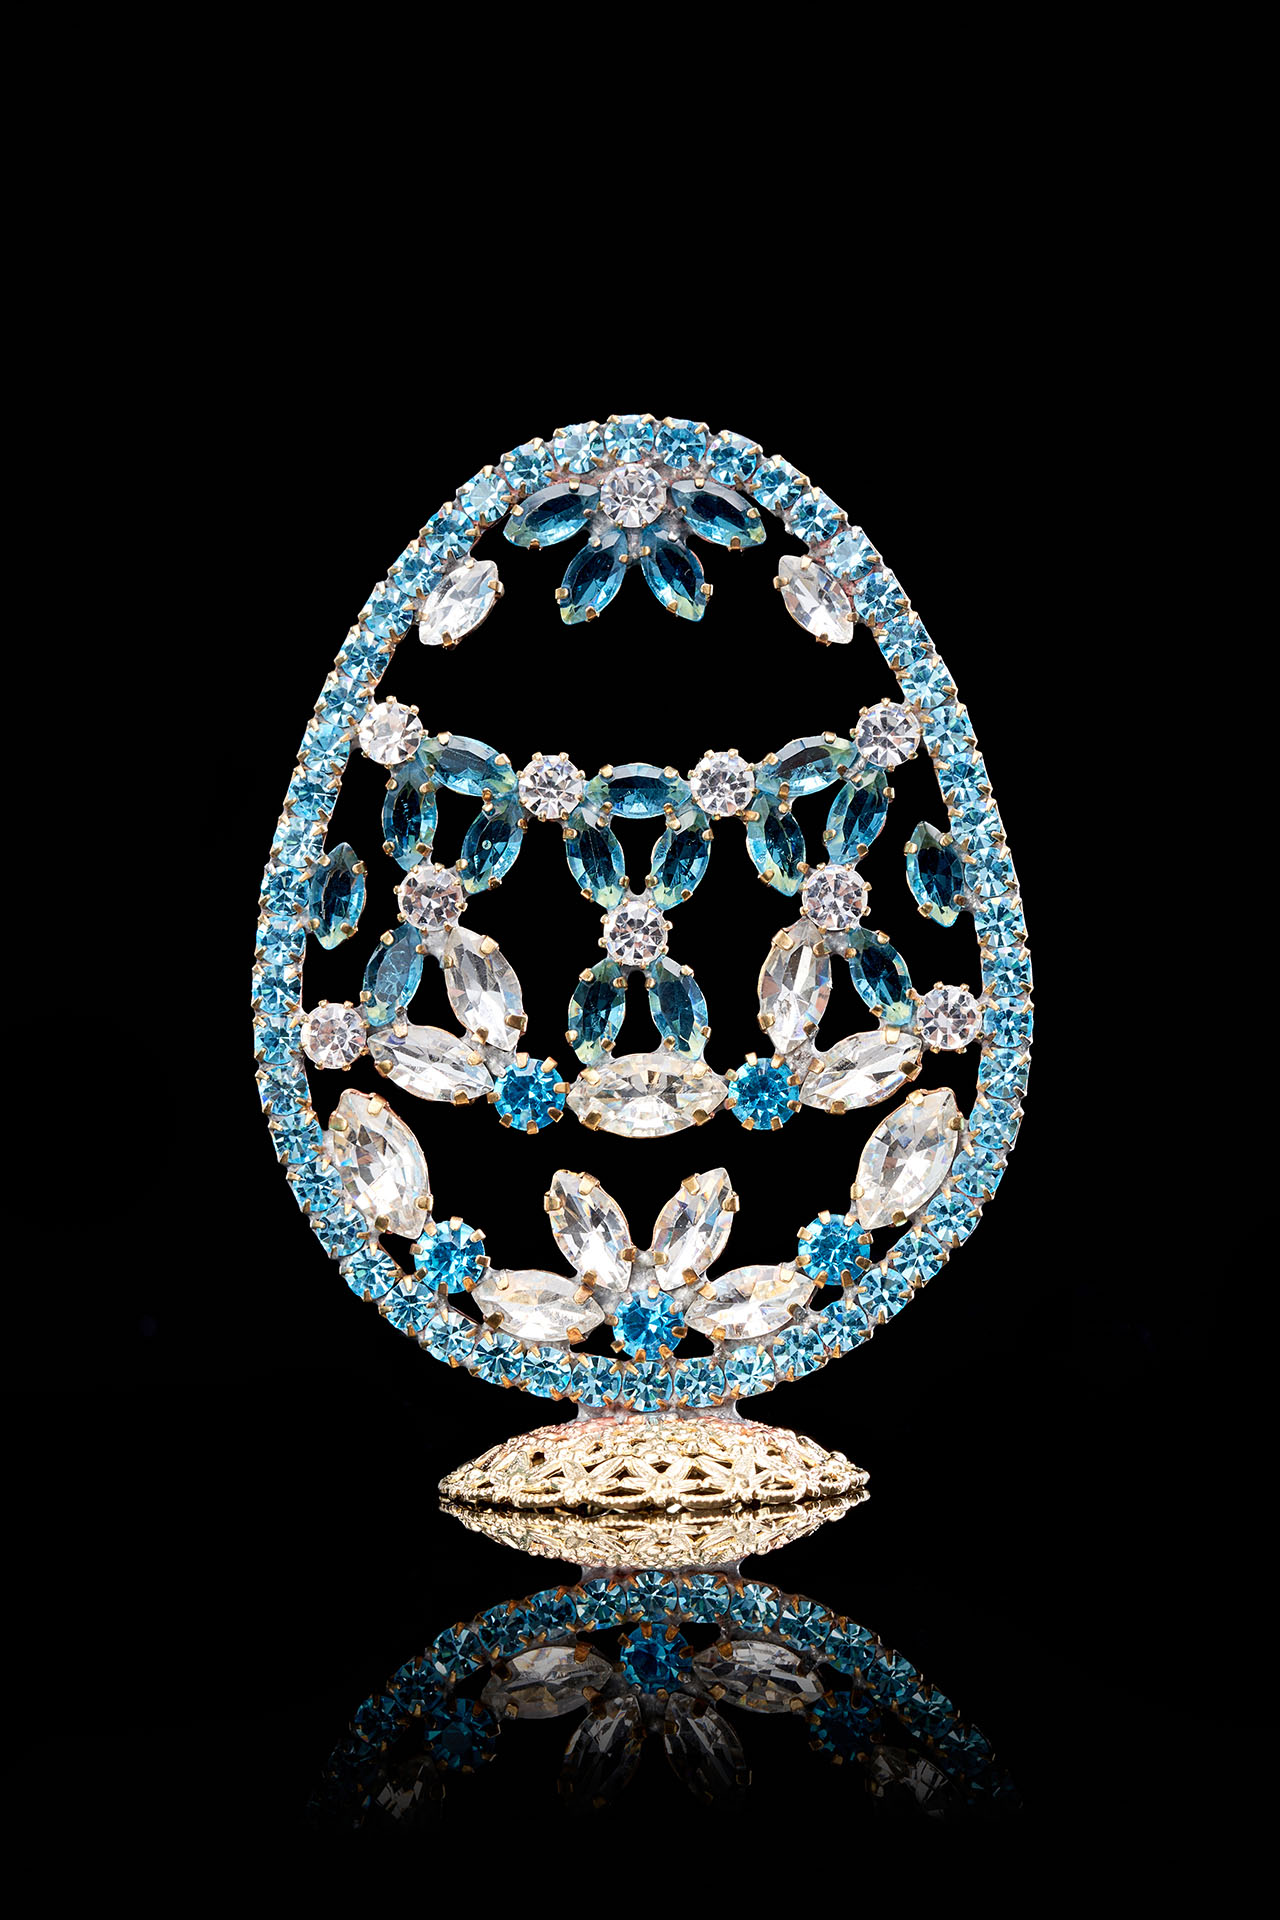 Delightful Easter Egg decoration with Blue crystals